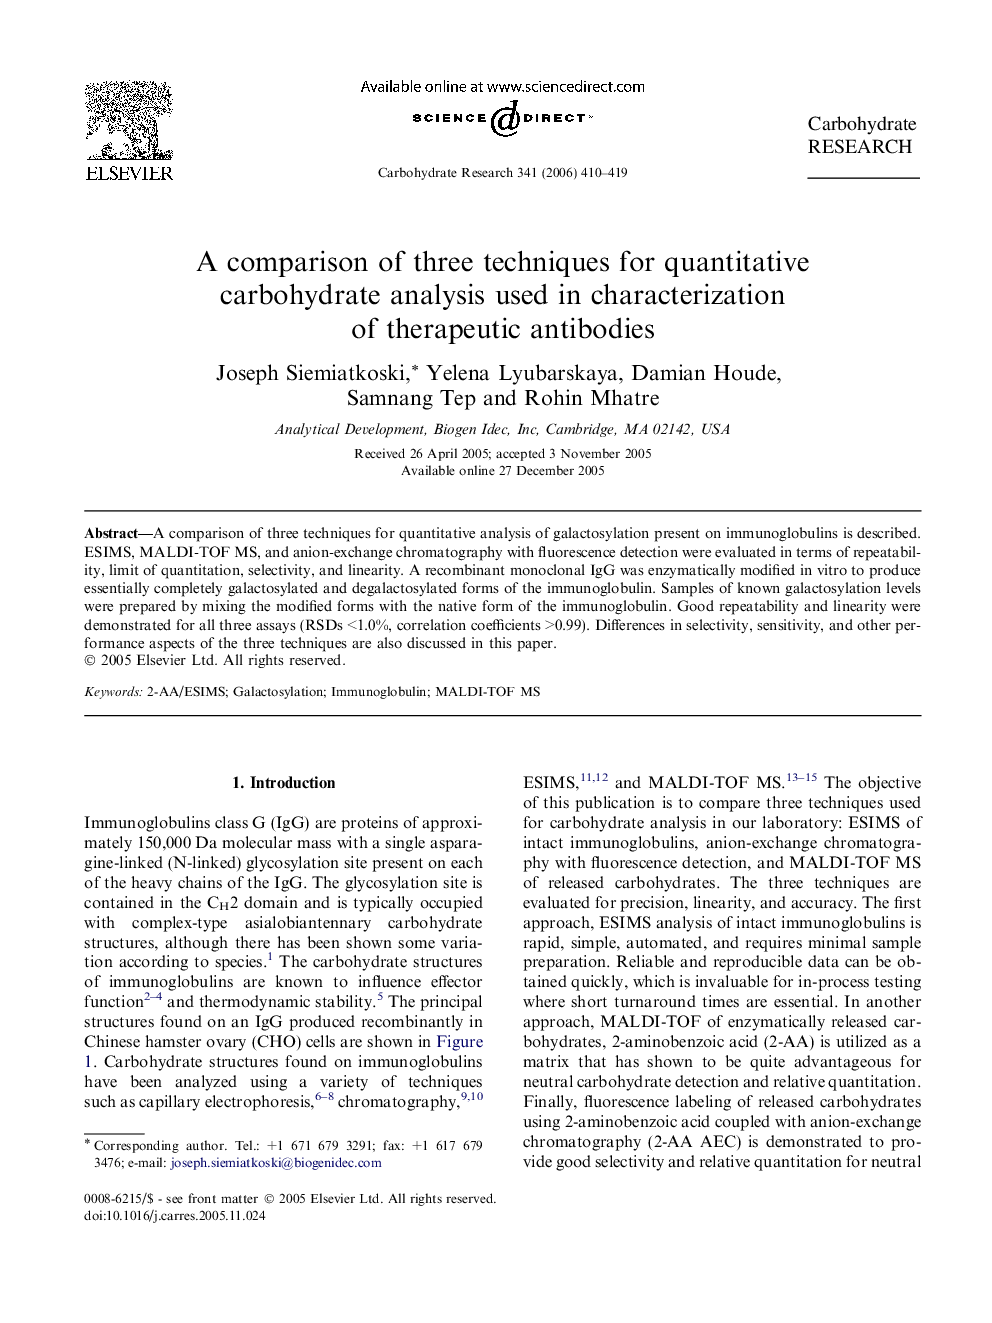 A comparison of three techniques for quantitative carbohydrate analysis used in characterization of therapeutic antibodies